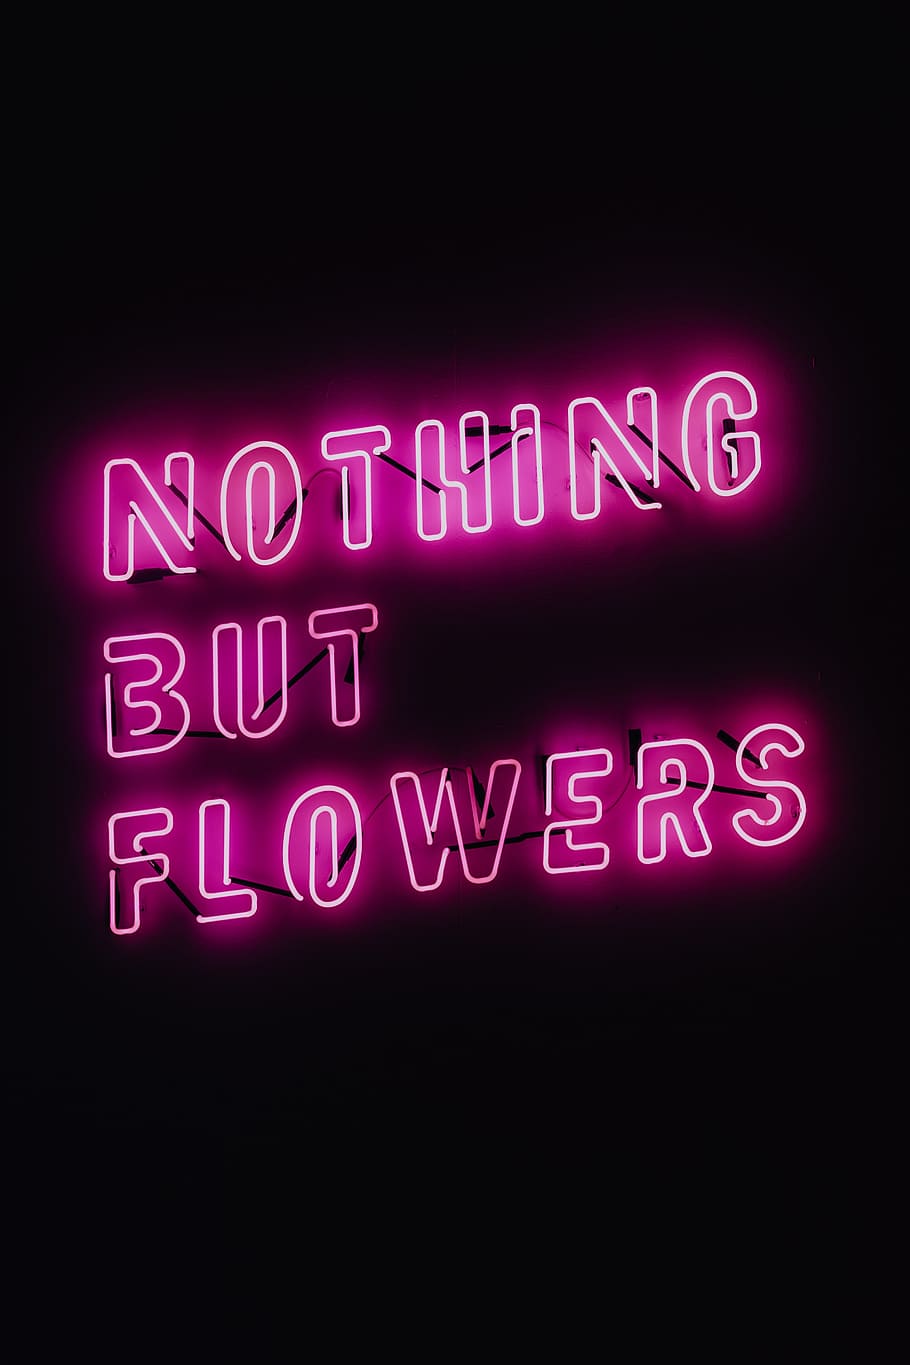 Nothing But Flowers Glowing Neon, quote, light, pink, ŁDF, lodz design festival